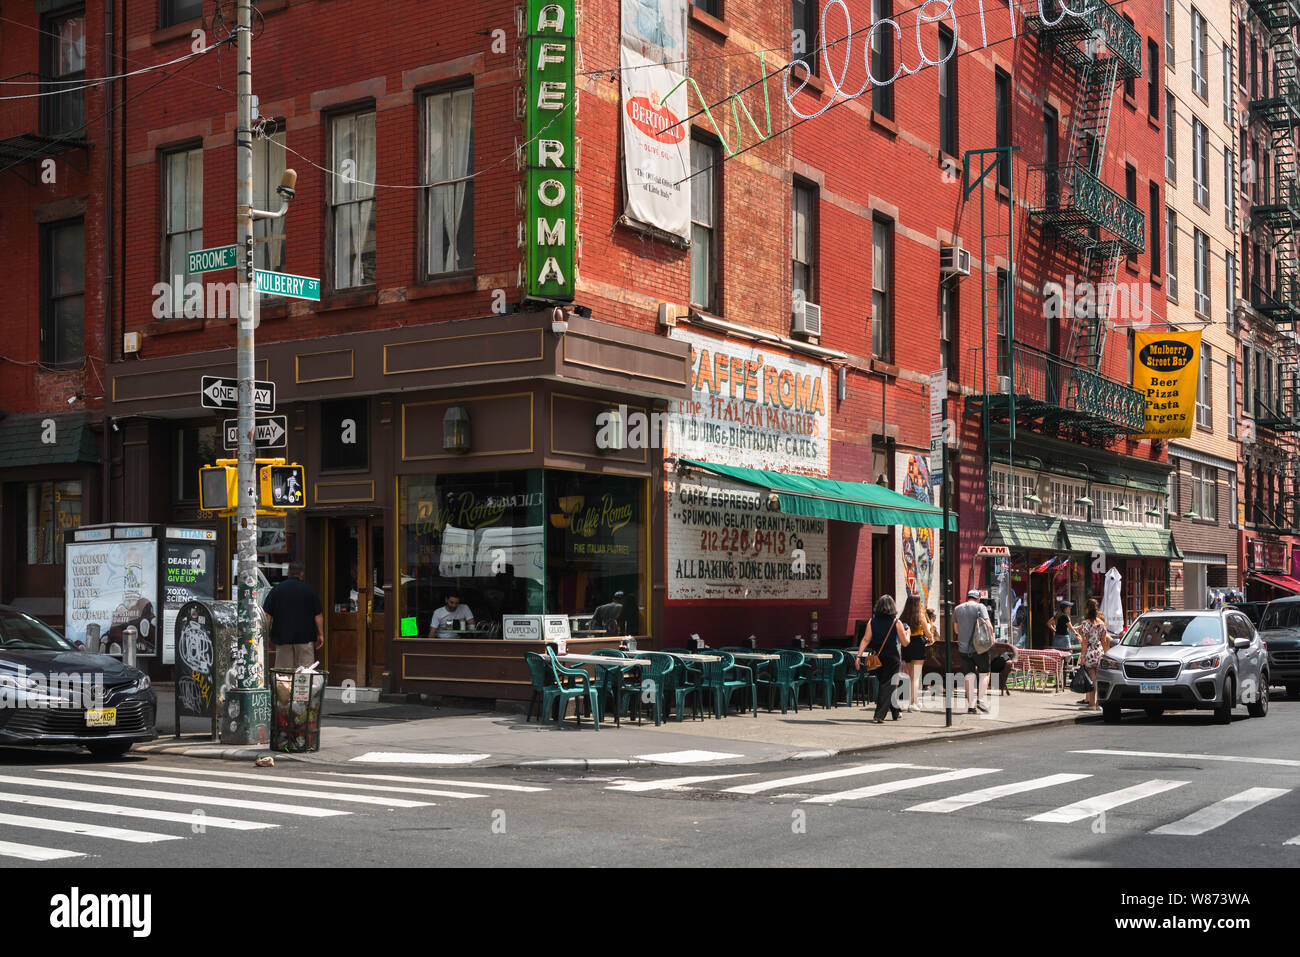 New York street, view of the corner of Mulberry Street and Broome Street in the center of Little Italy in downtown Manhattan, New York City, USA Stock Photo